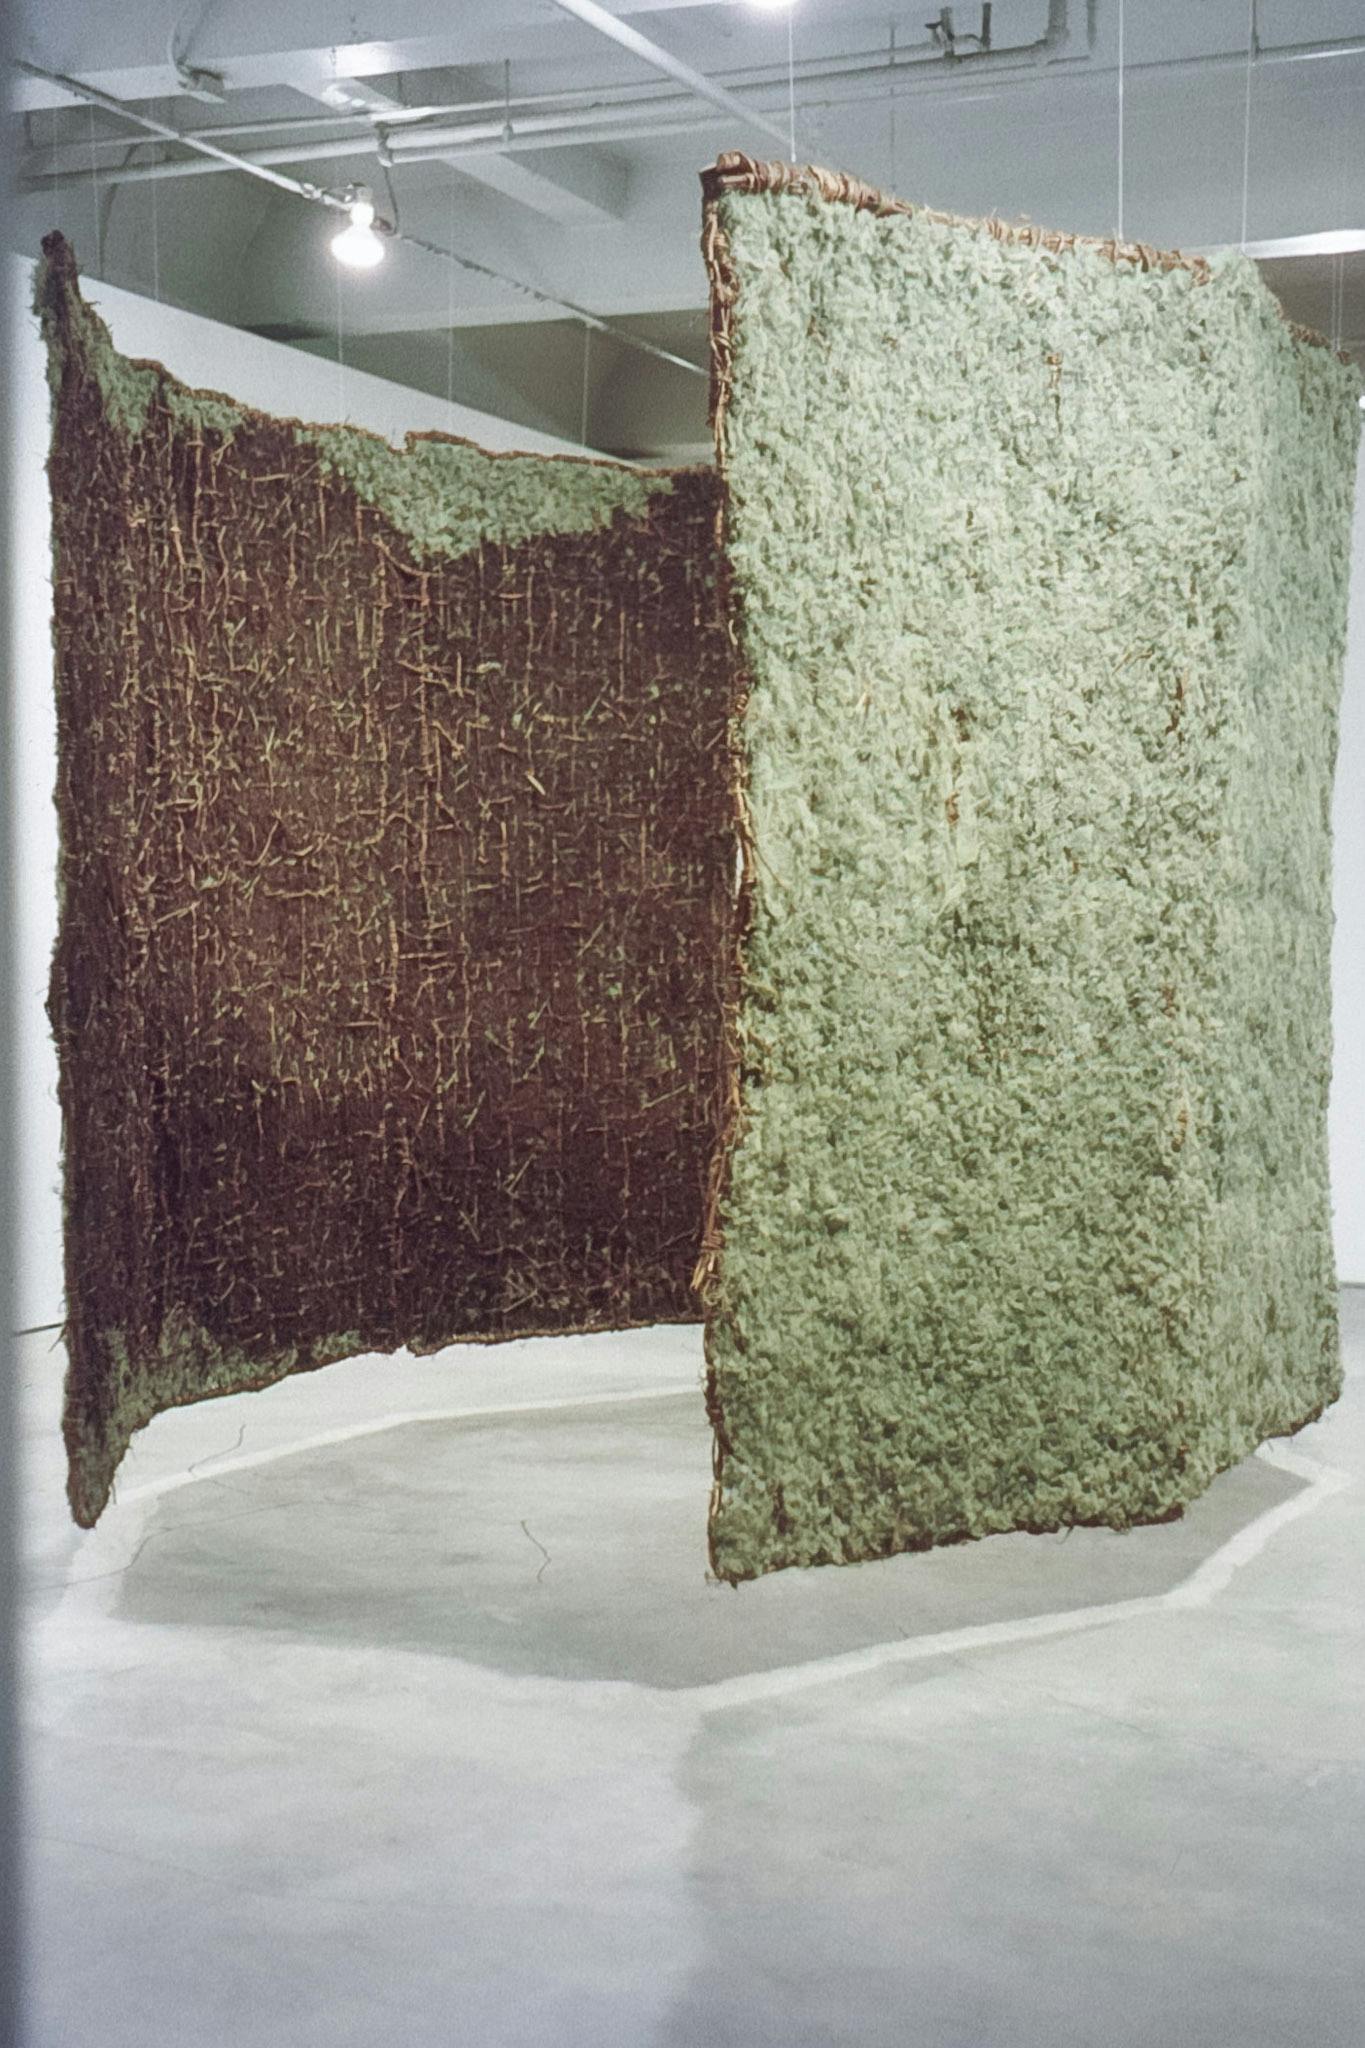 A large installation in a gallery. The work is a two large plane of coils of rusty wire on one side, and green moss on the other curved into an incomplete cylinder, suspended above the ground.